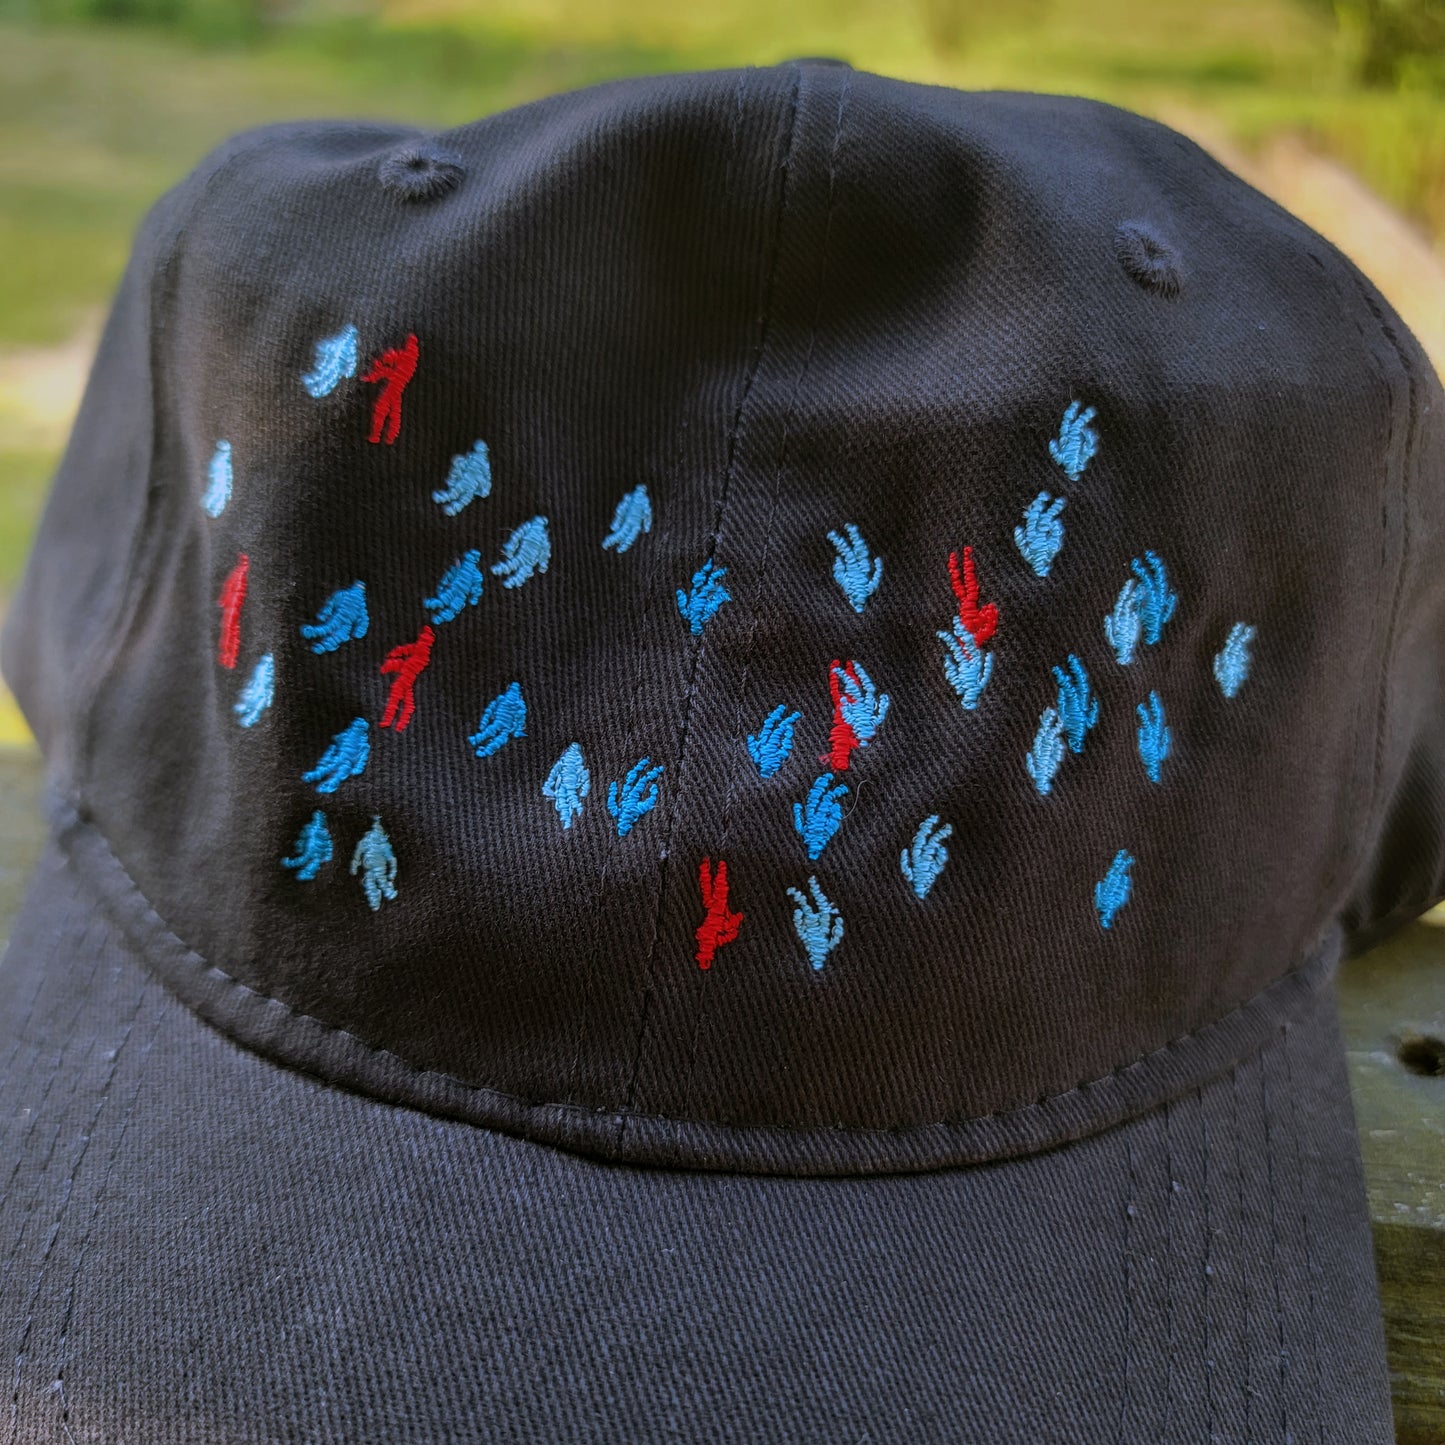 Rising/Falling Figures Brushed Twill Cap - Bright Eyes Inspired Embroidered Brushed Twill Cap